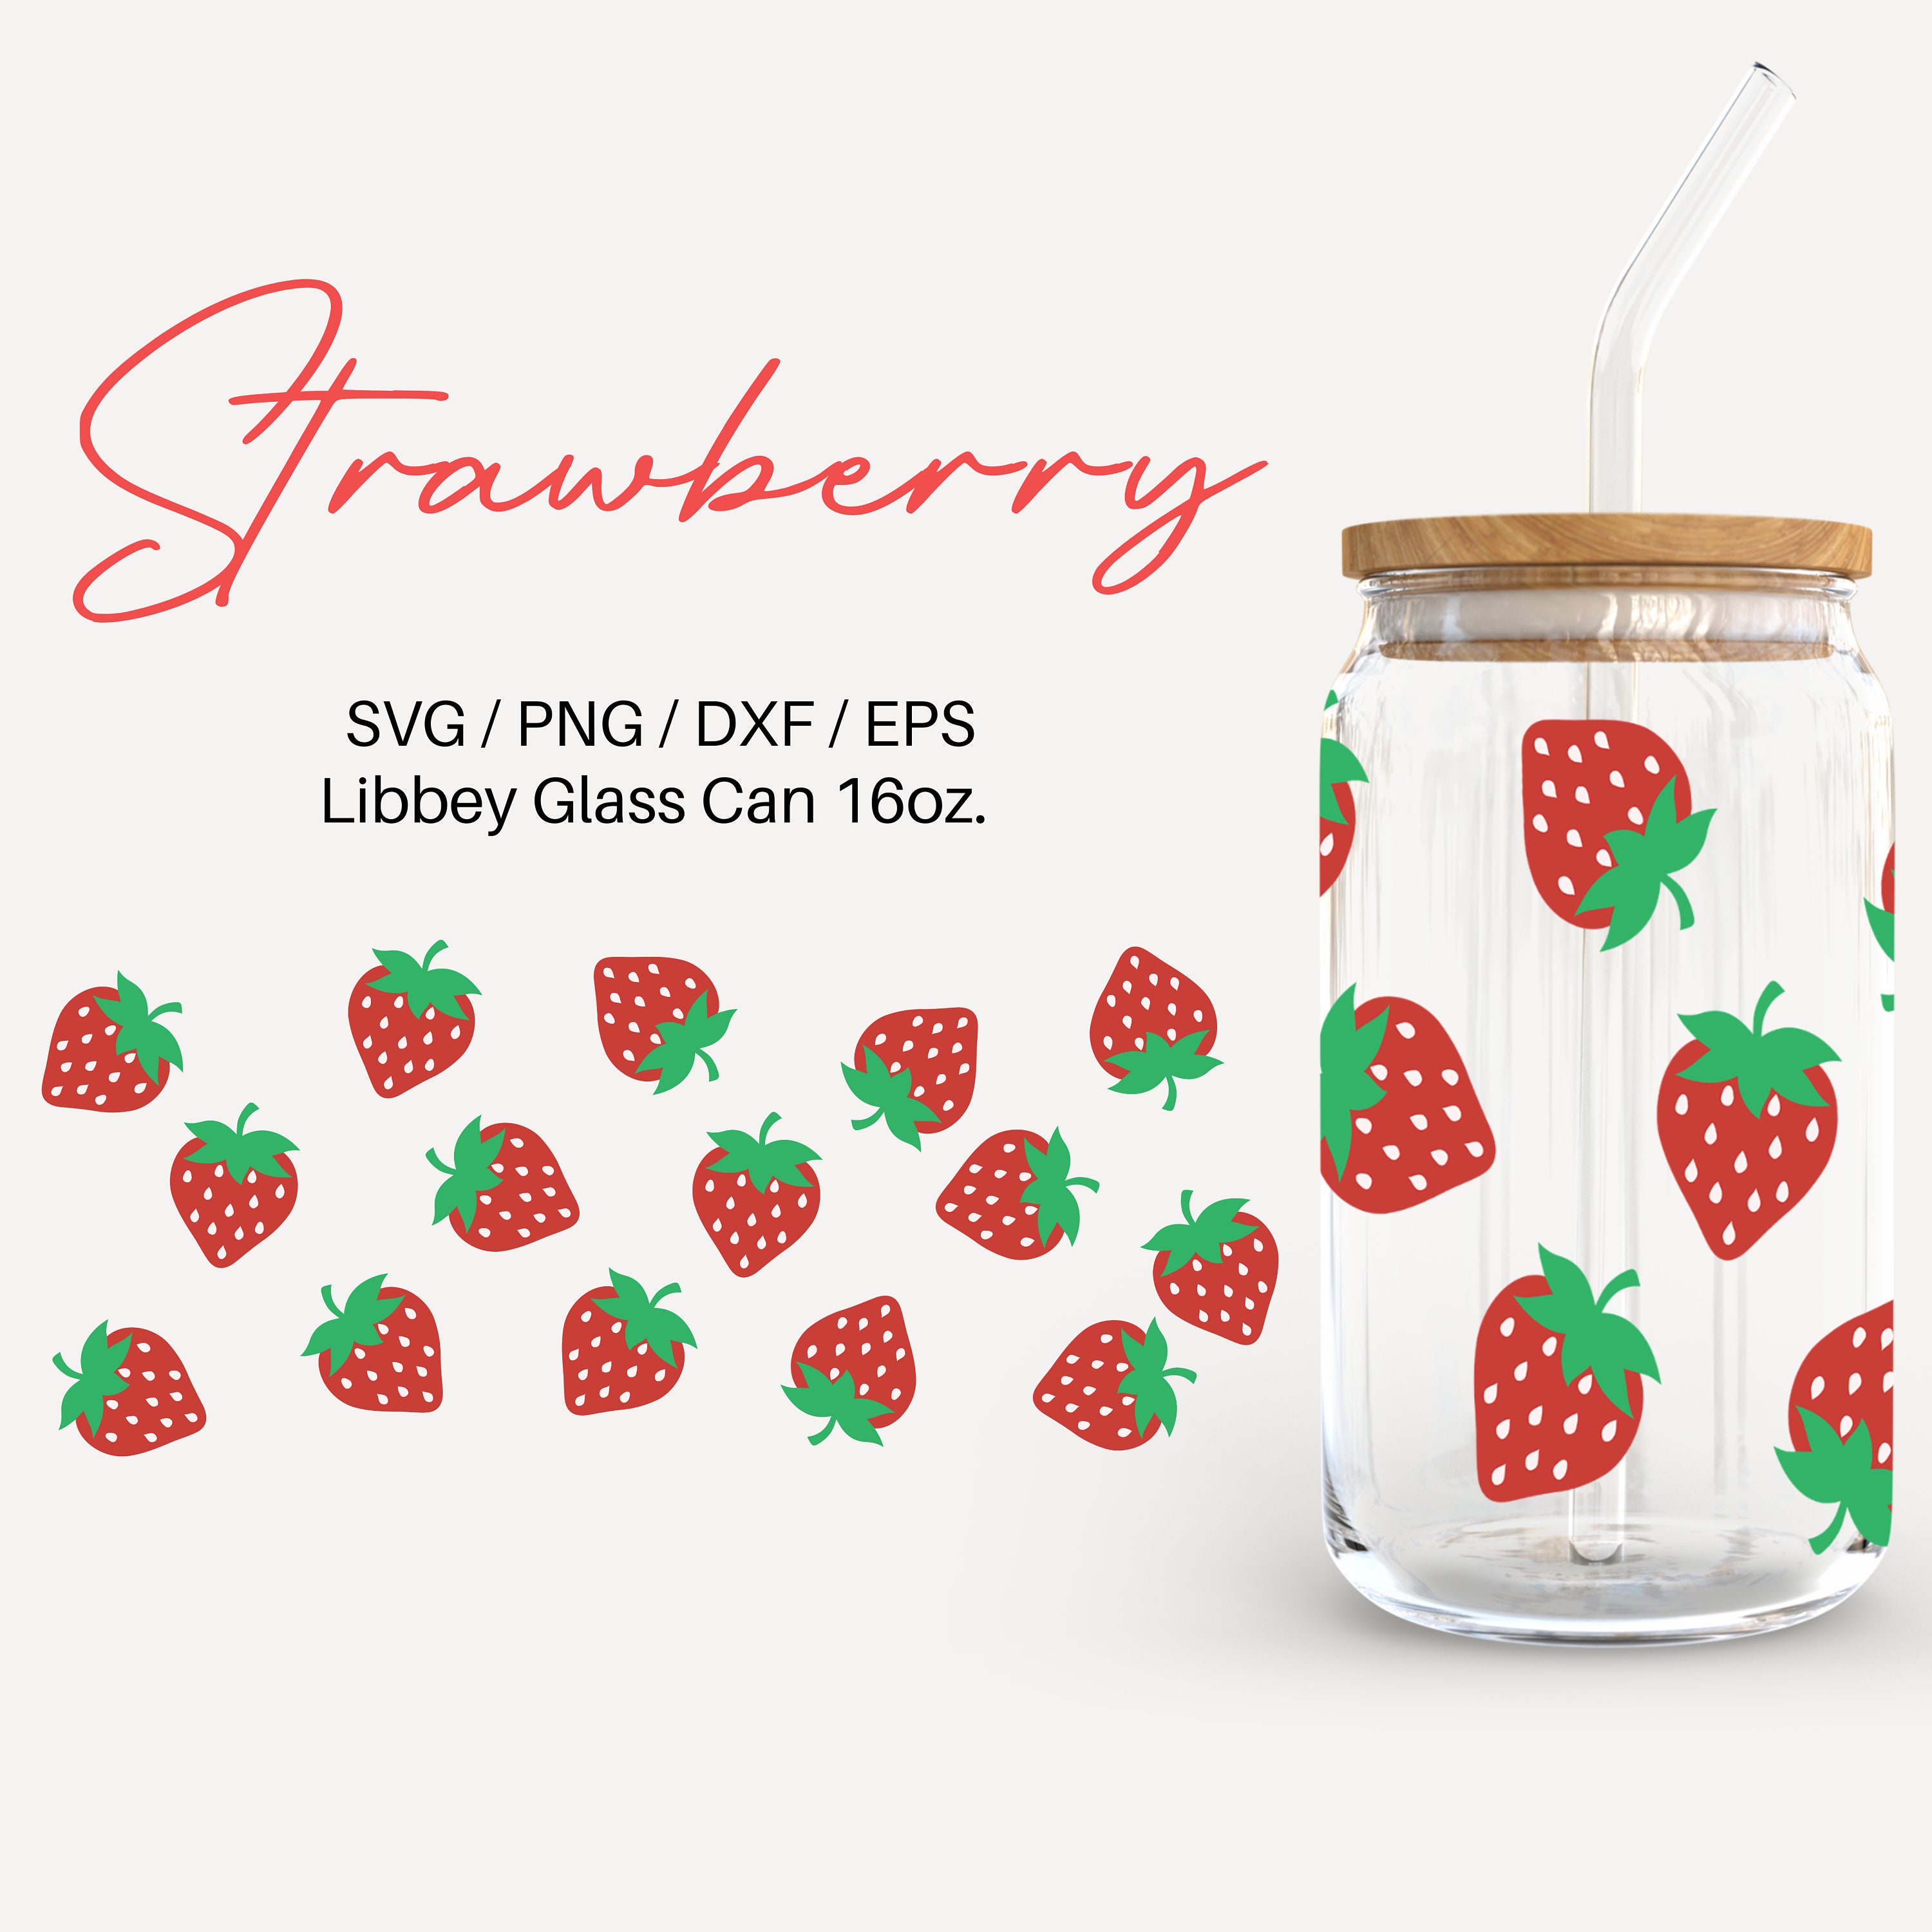 Strawberry Hearts and Flowers - UVDTF Beer Can Glass Wrap (Ready-to-Sh –  Happy Wrap Co.